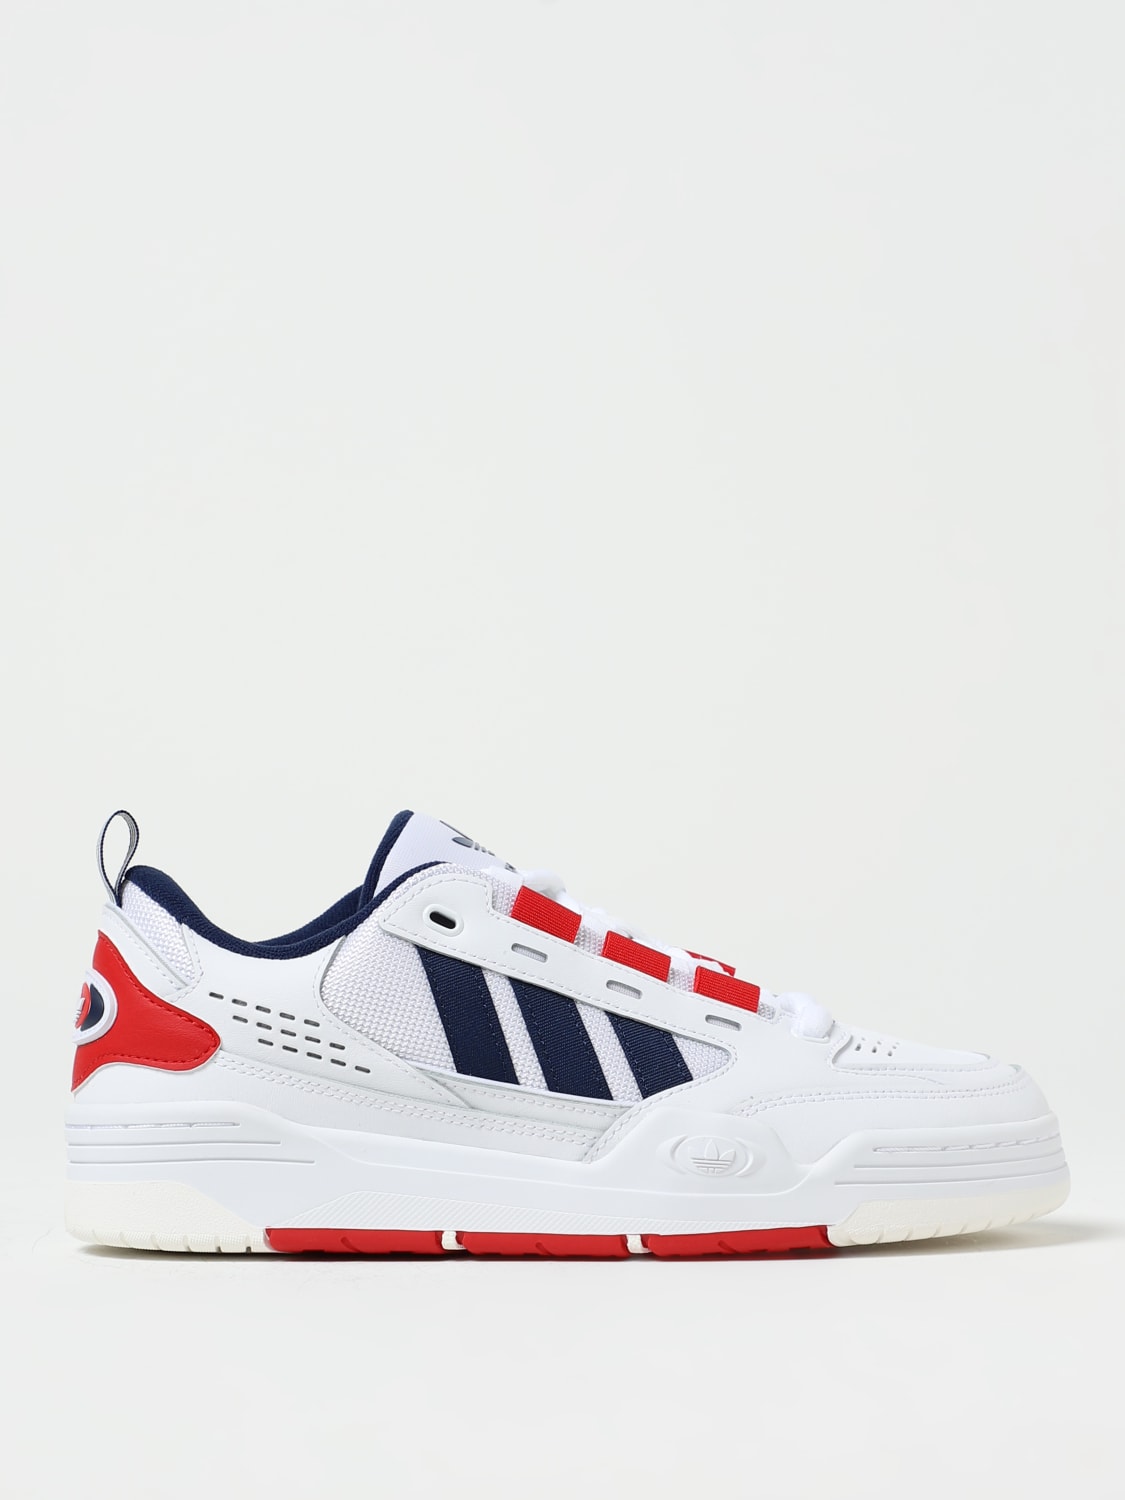 ID2103 at mesh | ADIDAS ADI2000 in sneakers ORIGINALS: Originals White online Adidas sneakers and leather -